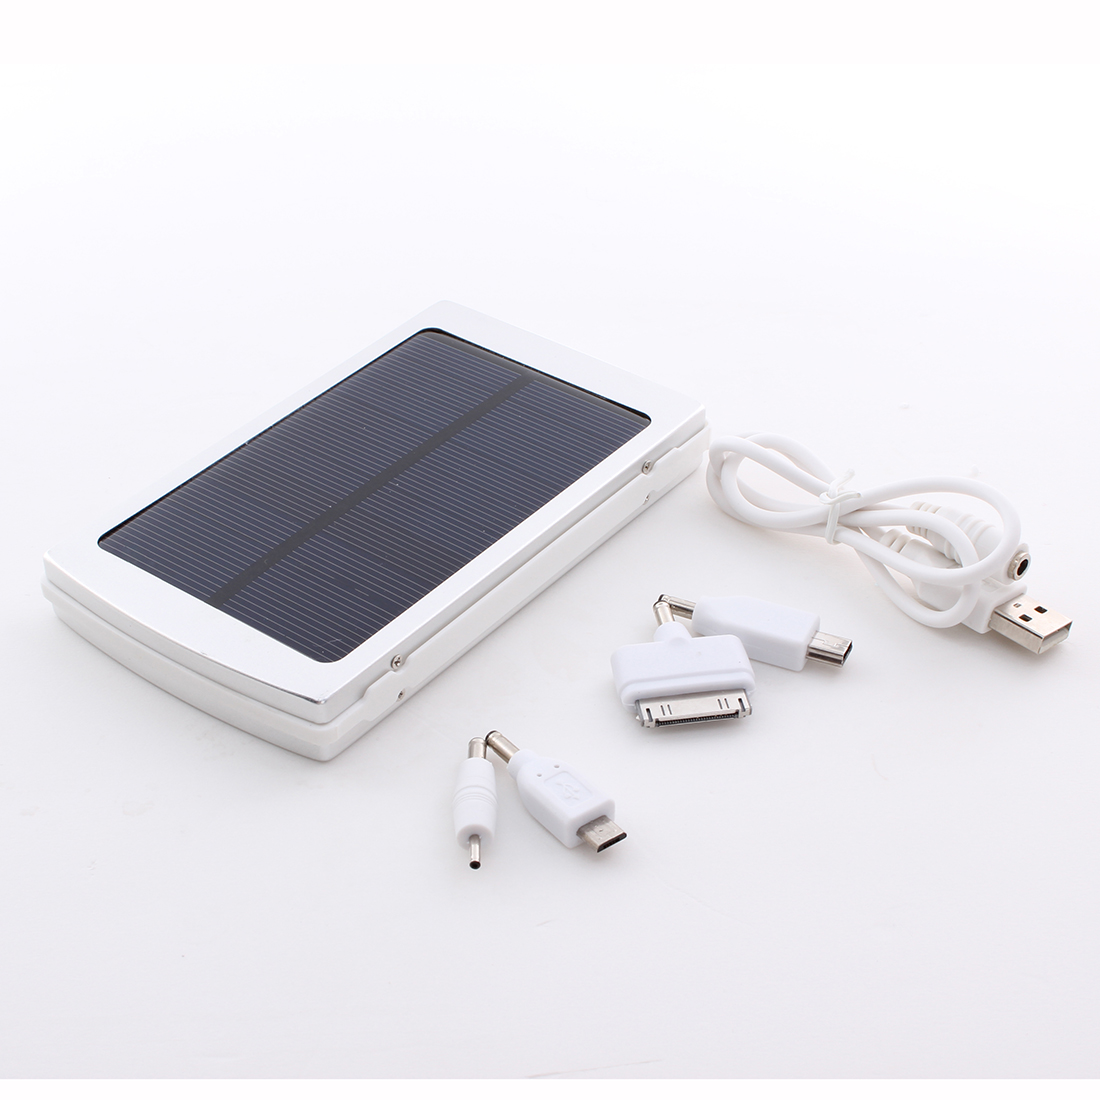 Solar-Charger-Mobile-Phone-Cell-Phone-Power-Bank-Charger-for-Camping-Hiking-Travel-955194-5